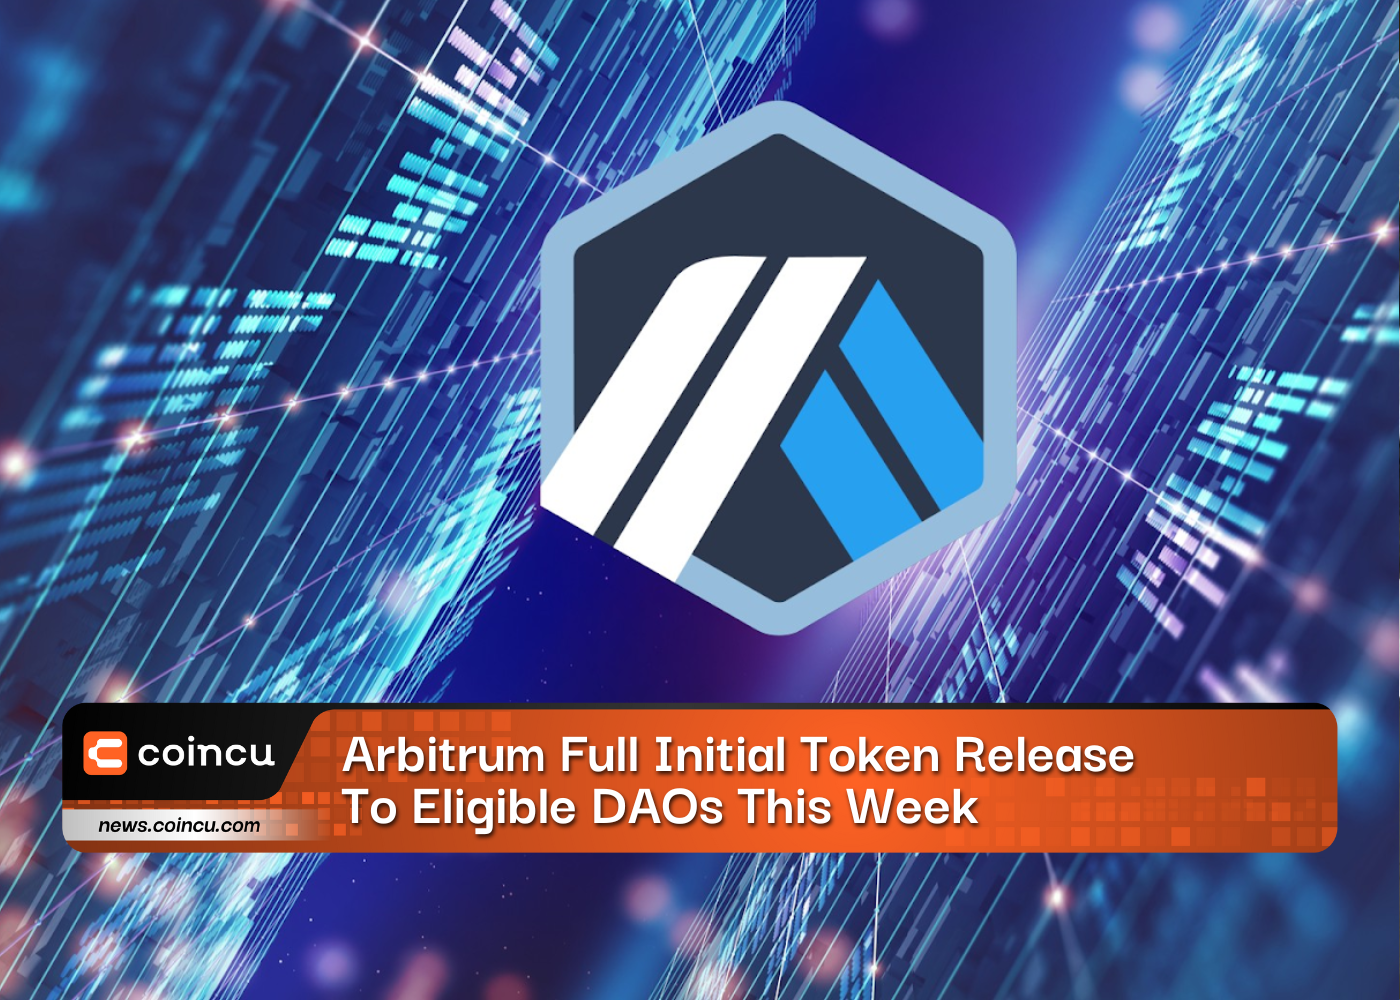 Arbitrum Full Initial Token Release To Eligible DAOs This Week